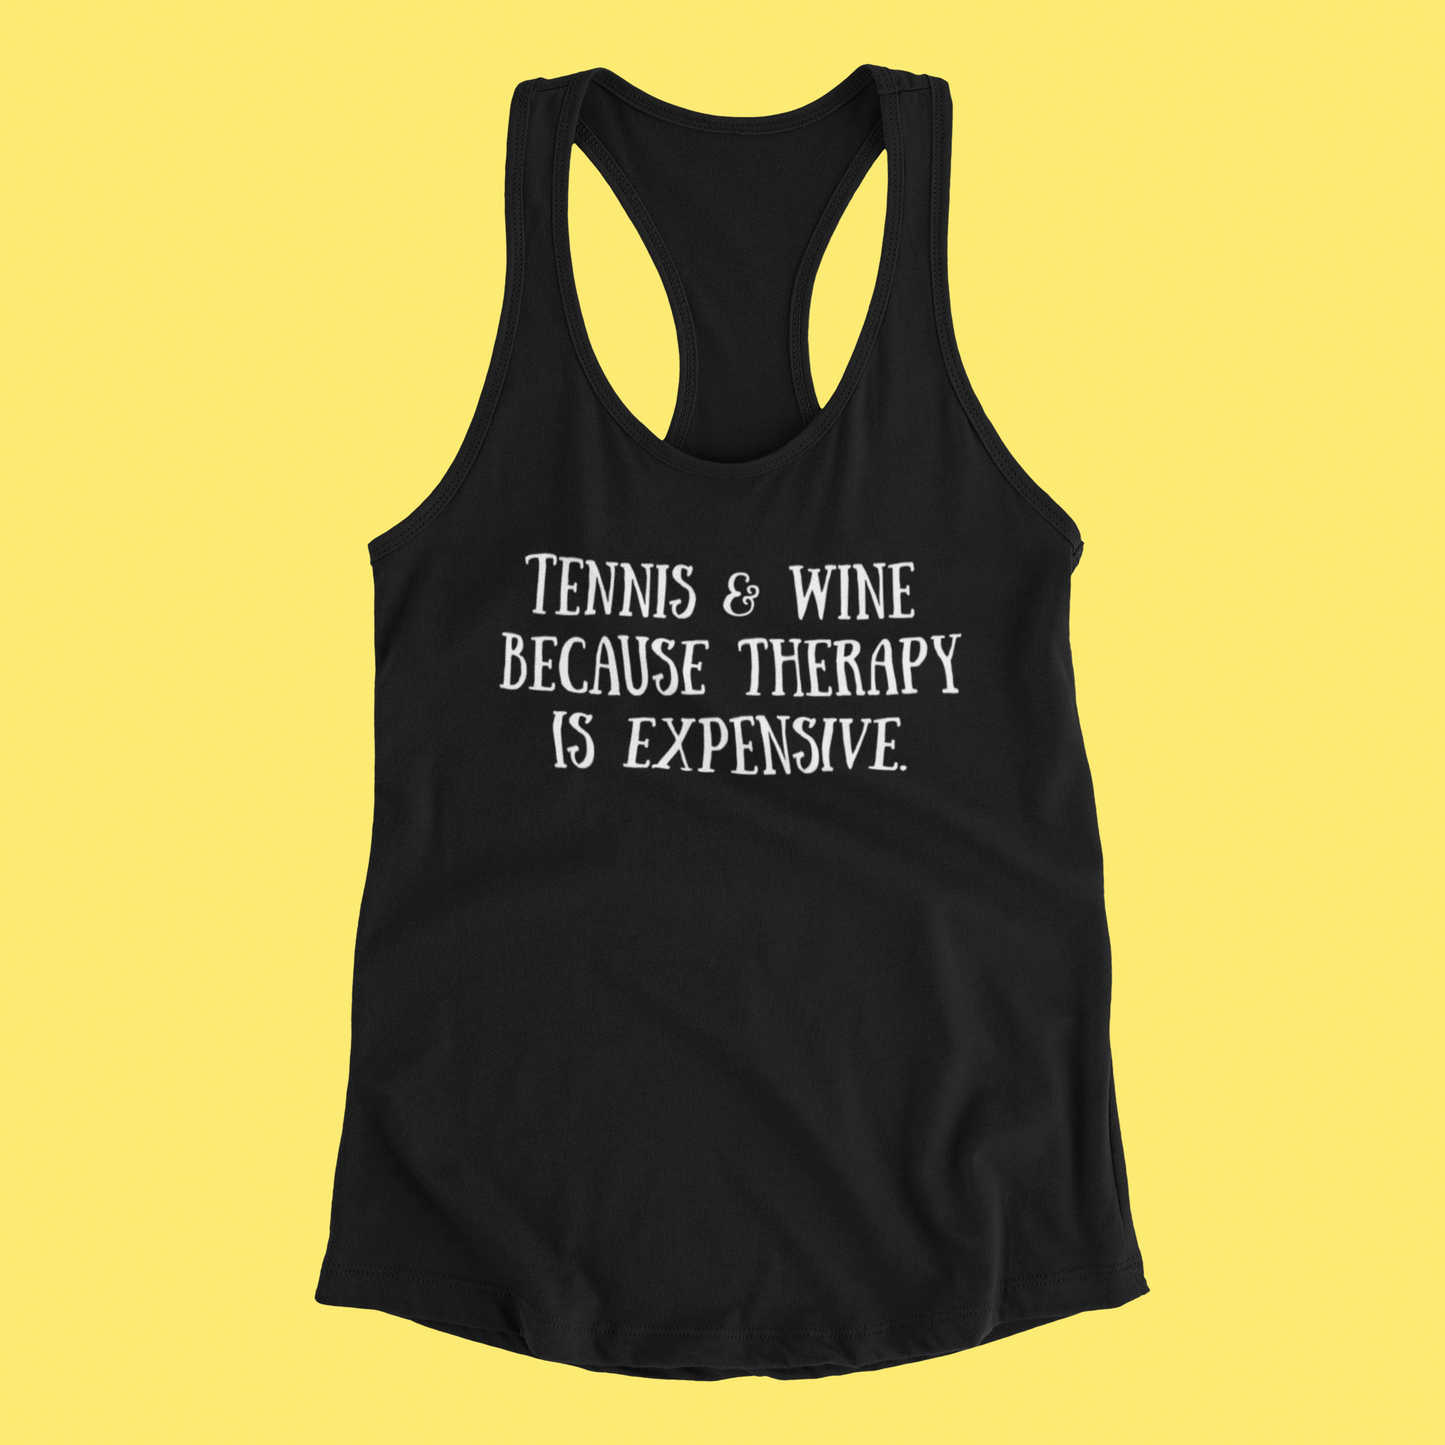 Tennis & Wine...because therapy is expensive